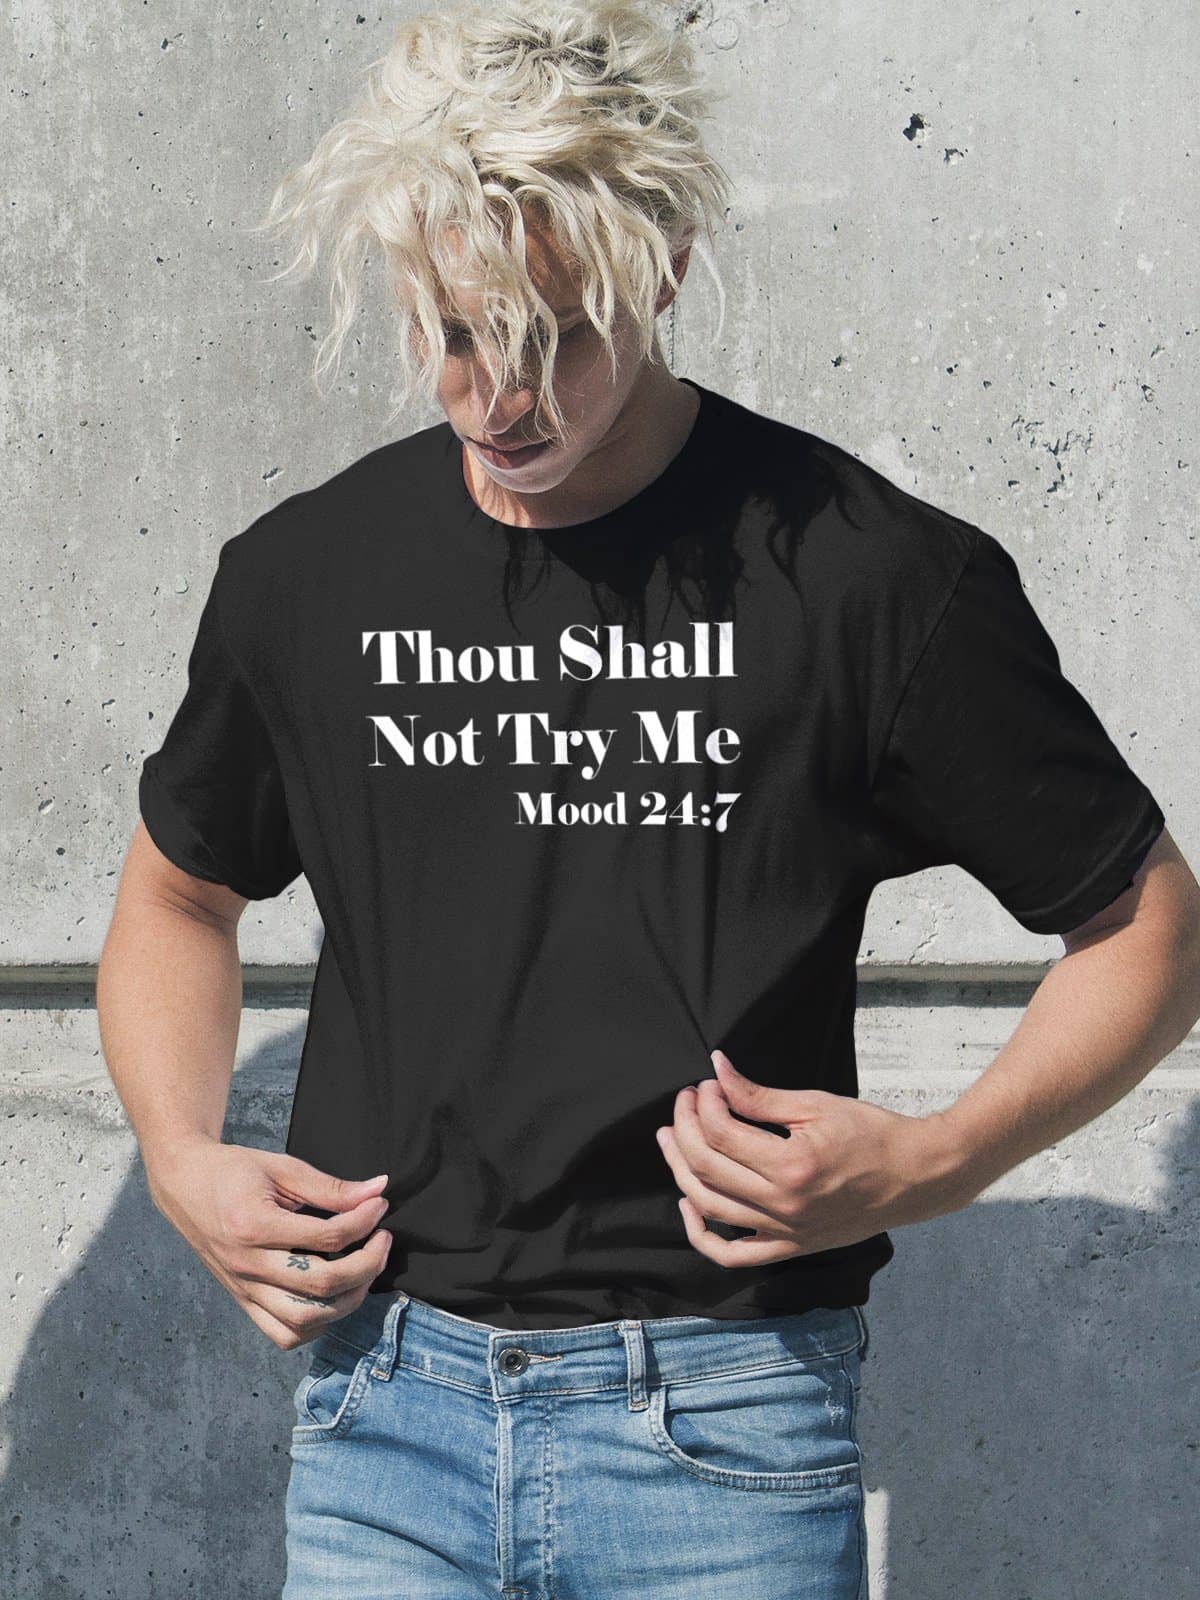 Thou Shall Not Try Me Mood 24 :7 Funny Black T Shirt for Men and Women - Catch My Drift India  black, clothing, female, funny, general, made in india, shirt, t shirt, trending, tshirt